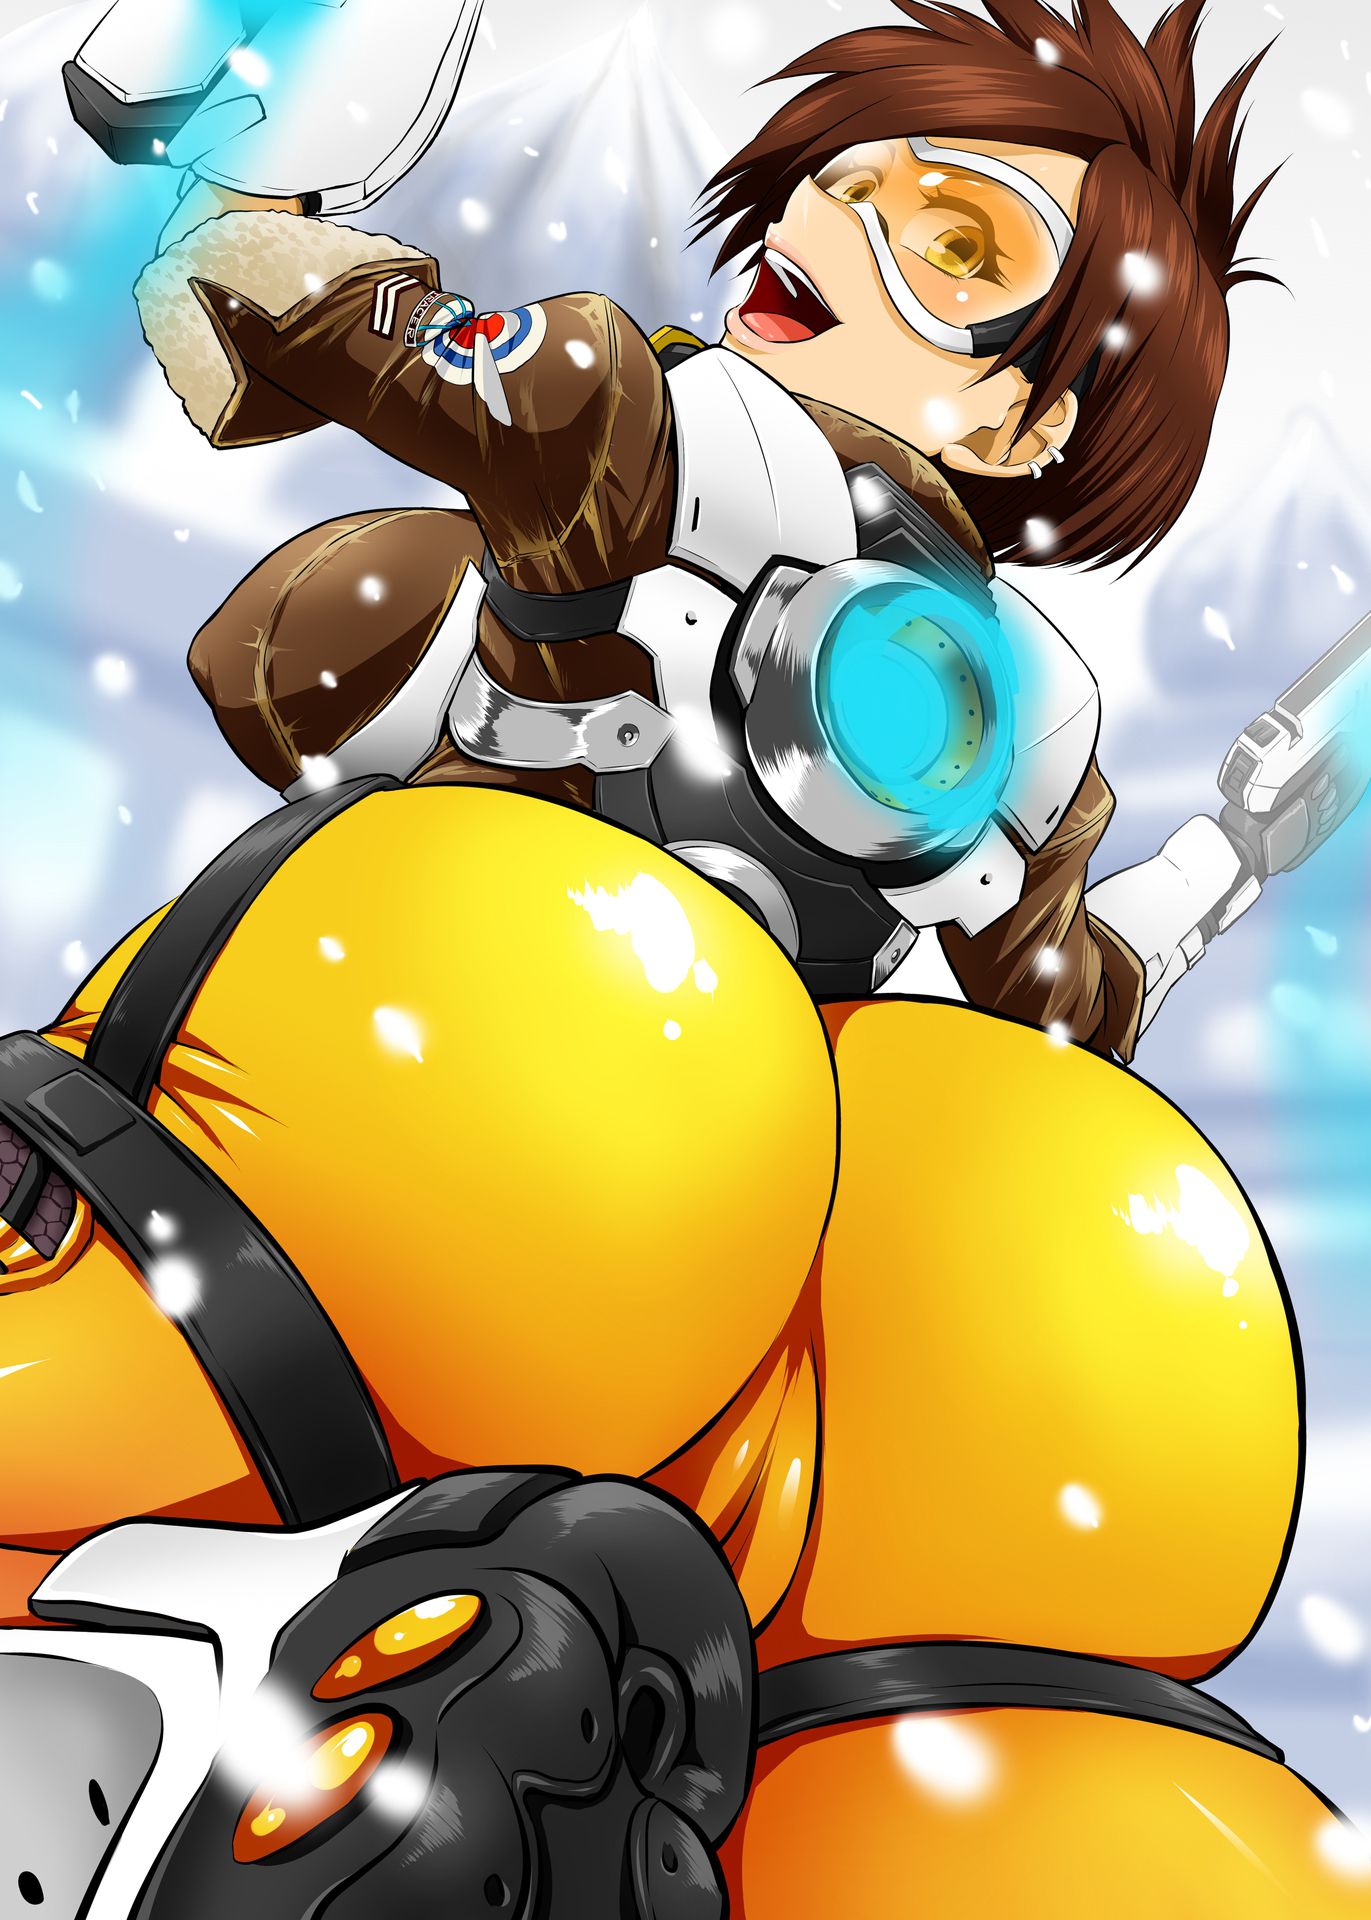 [Over-watch] Tracer photo gallery Wwww Part2 28